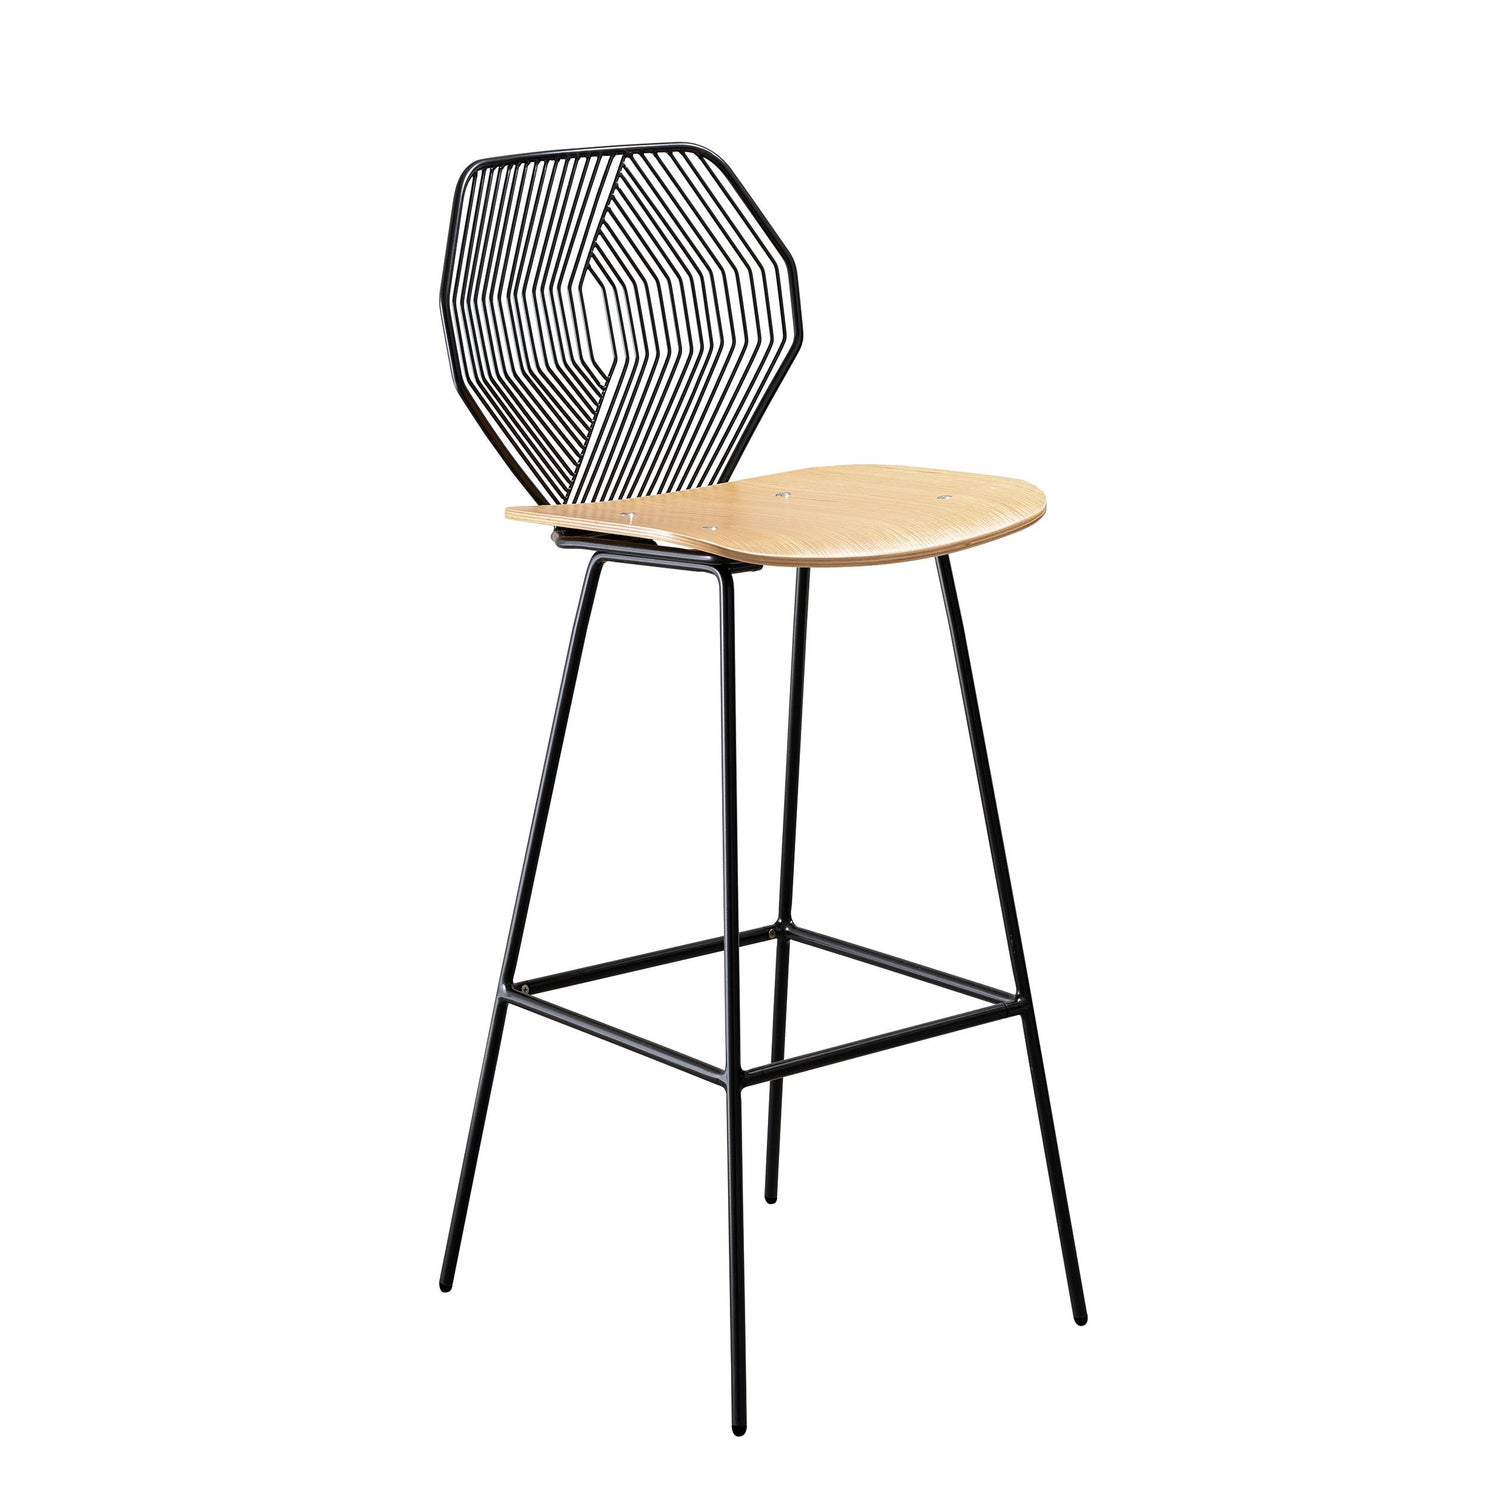 Modern Wire Bar Stool With A Wood Seat, Wire Bar Stools Nz